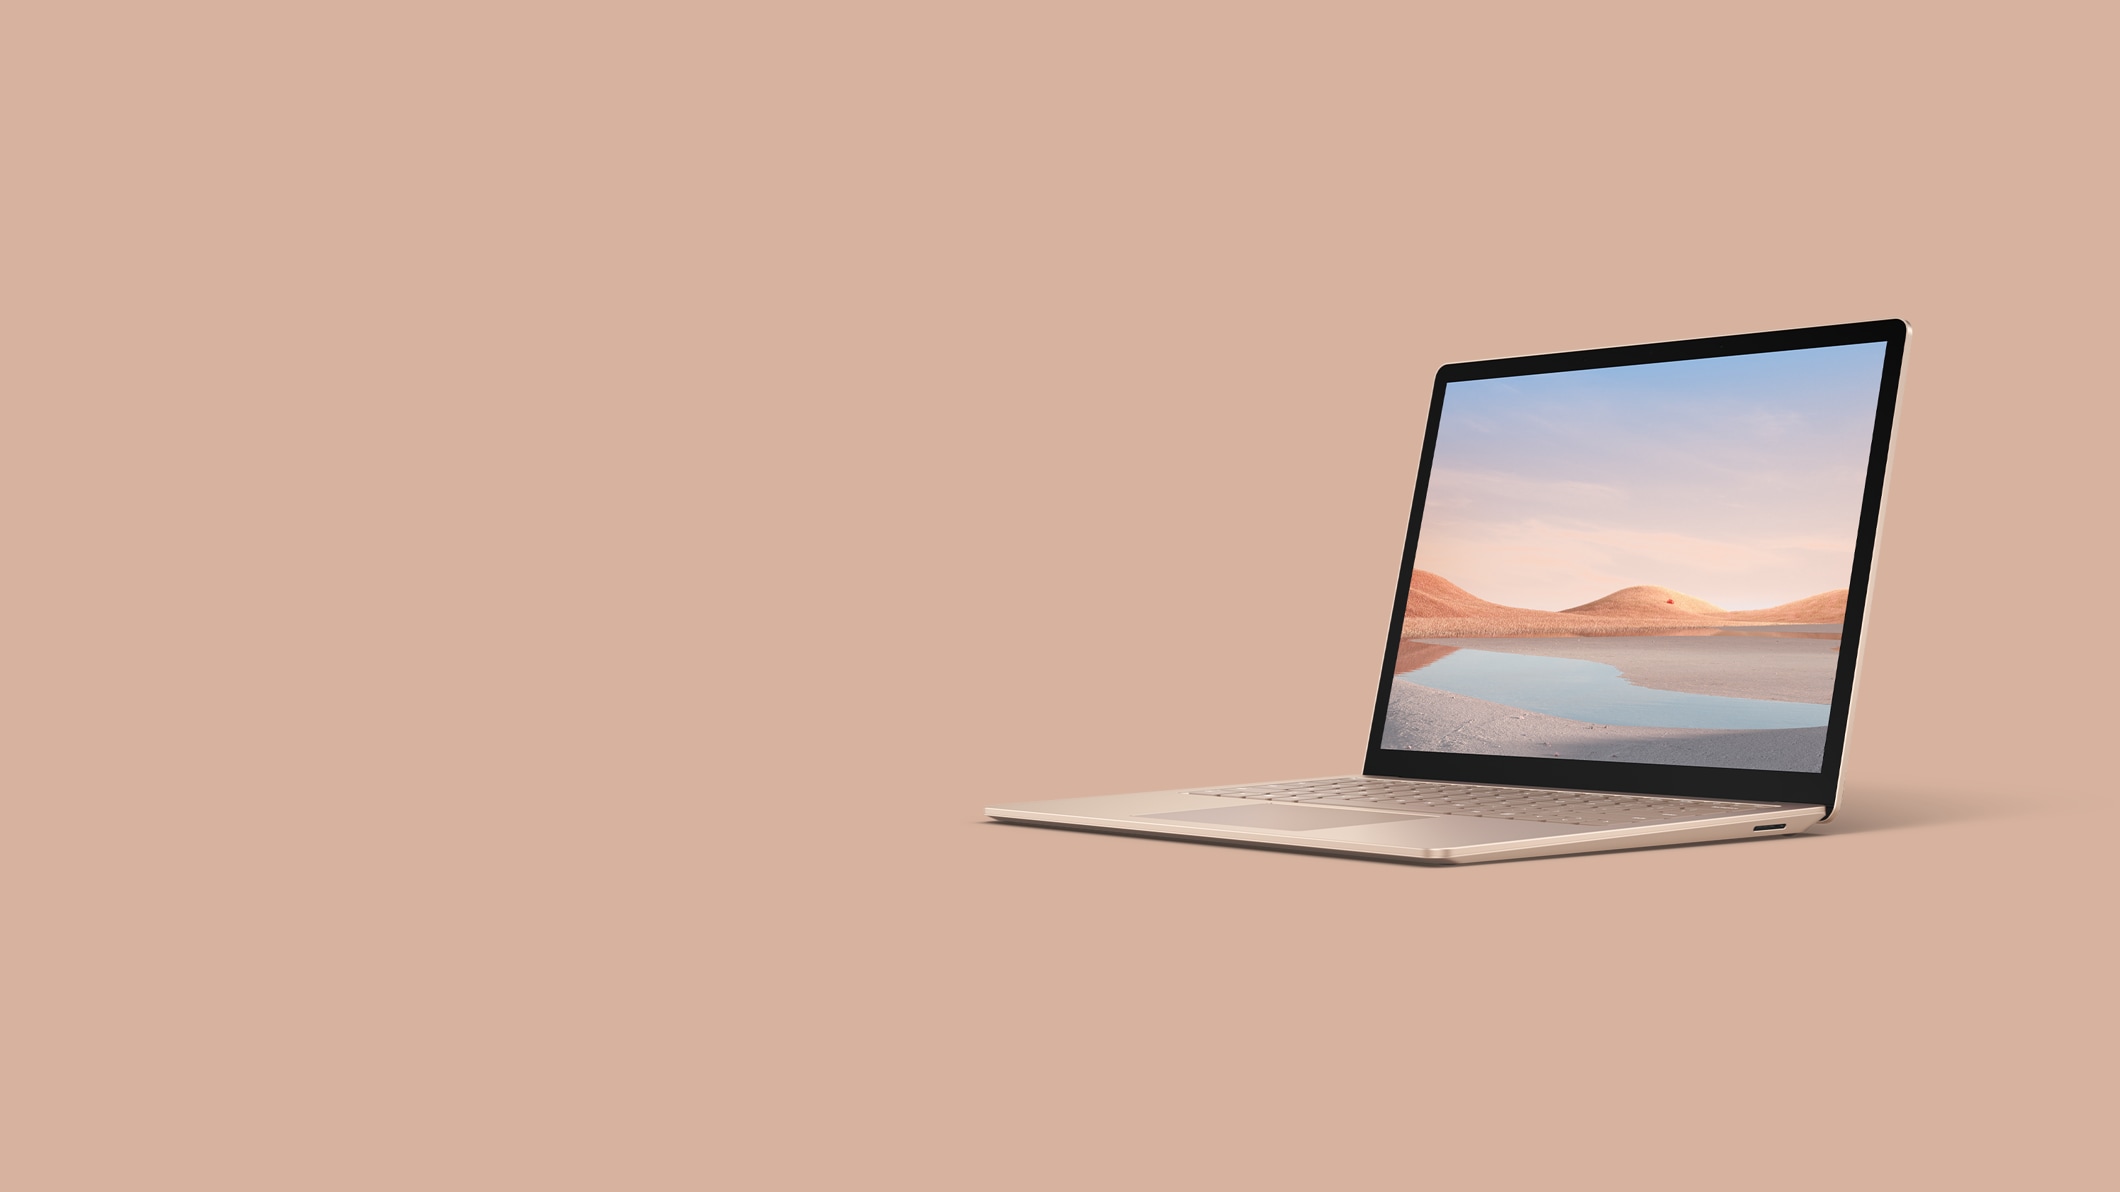 Surface Laptop 4 for Business in Sandstone.